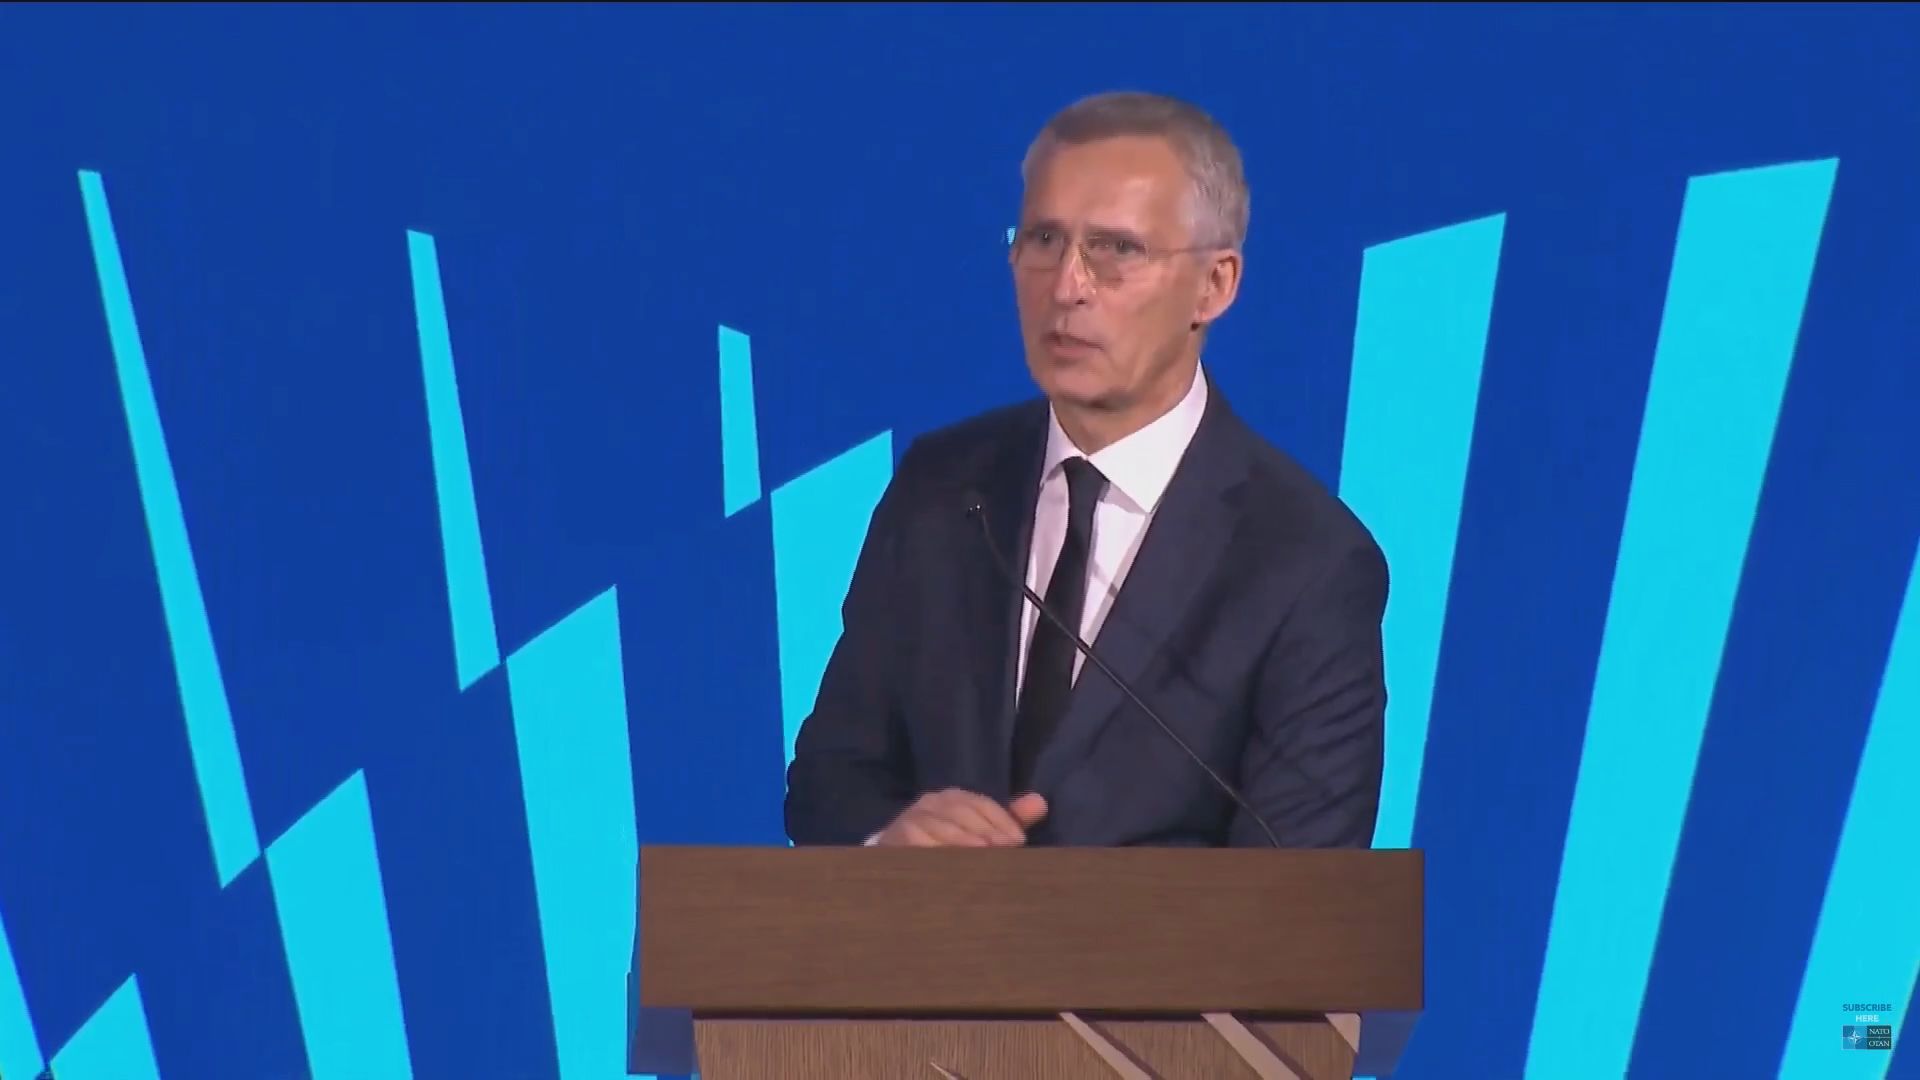 NATO Secretary General Outlines New Defense Industry Agreement, Urges Countries to Contribute to NATO's Defense Budget